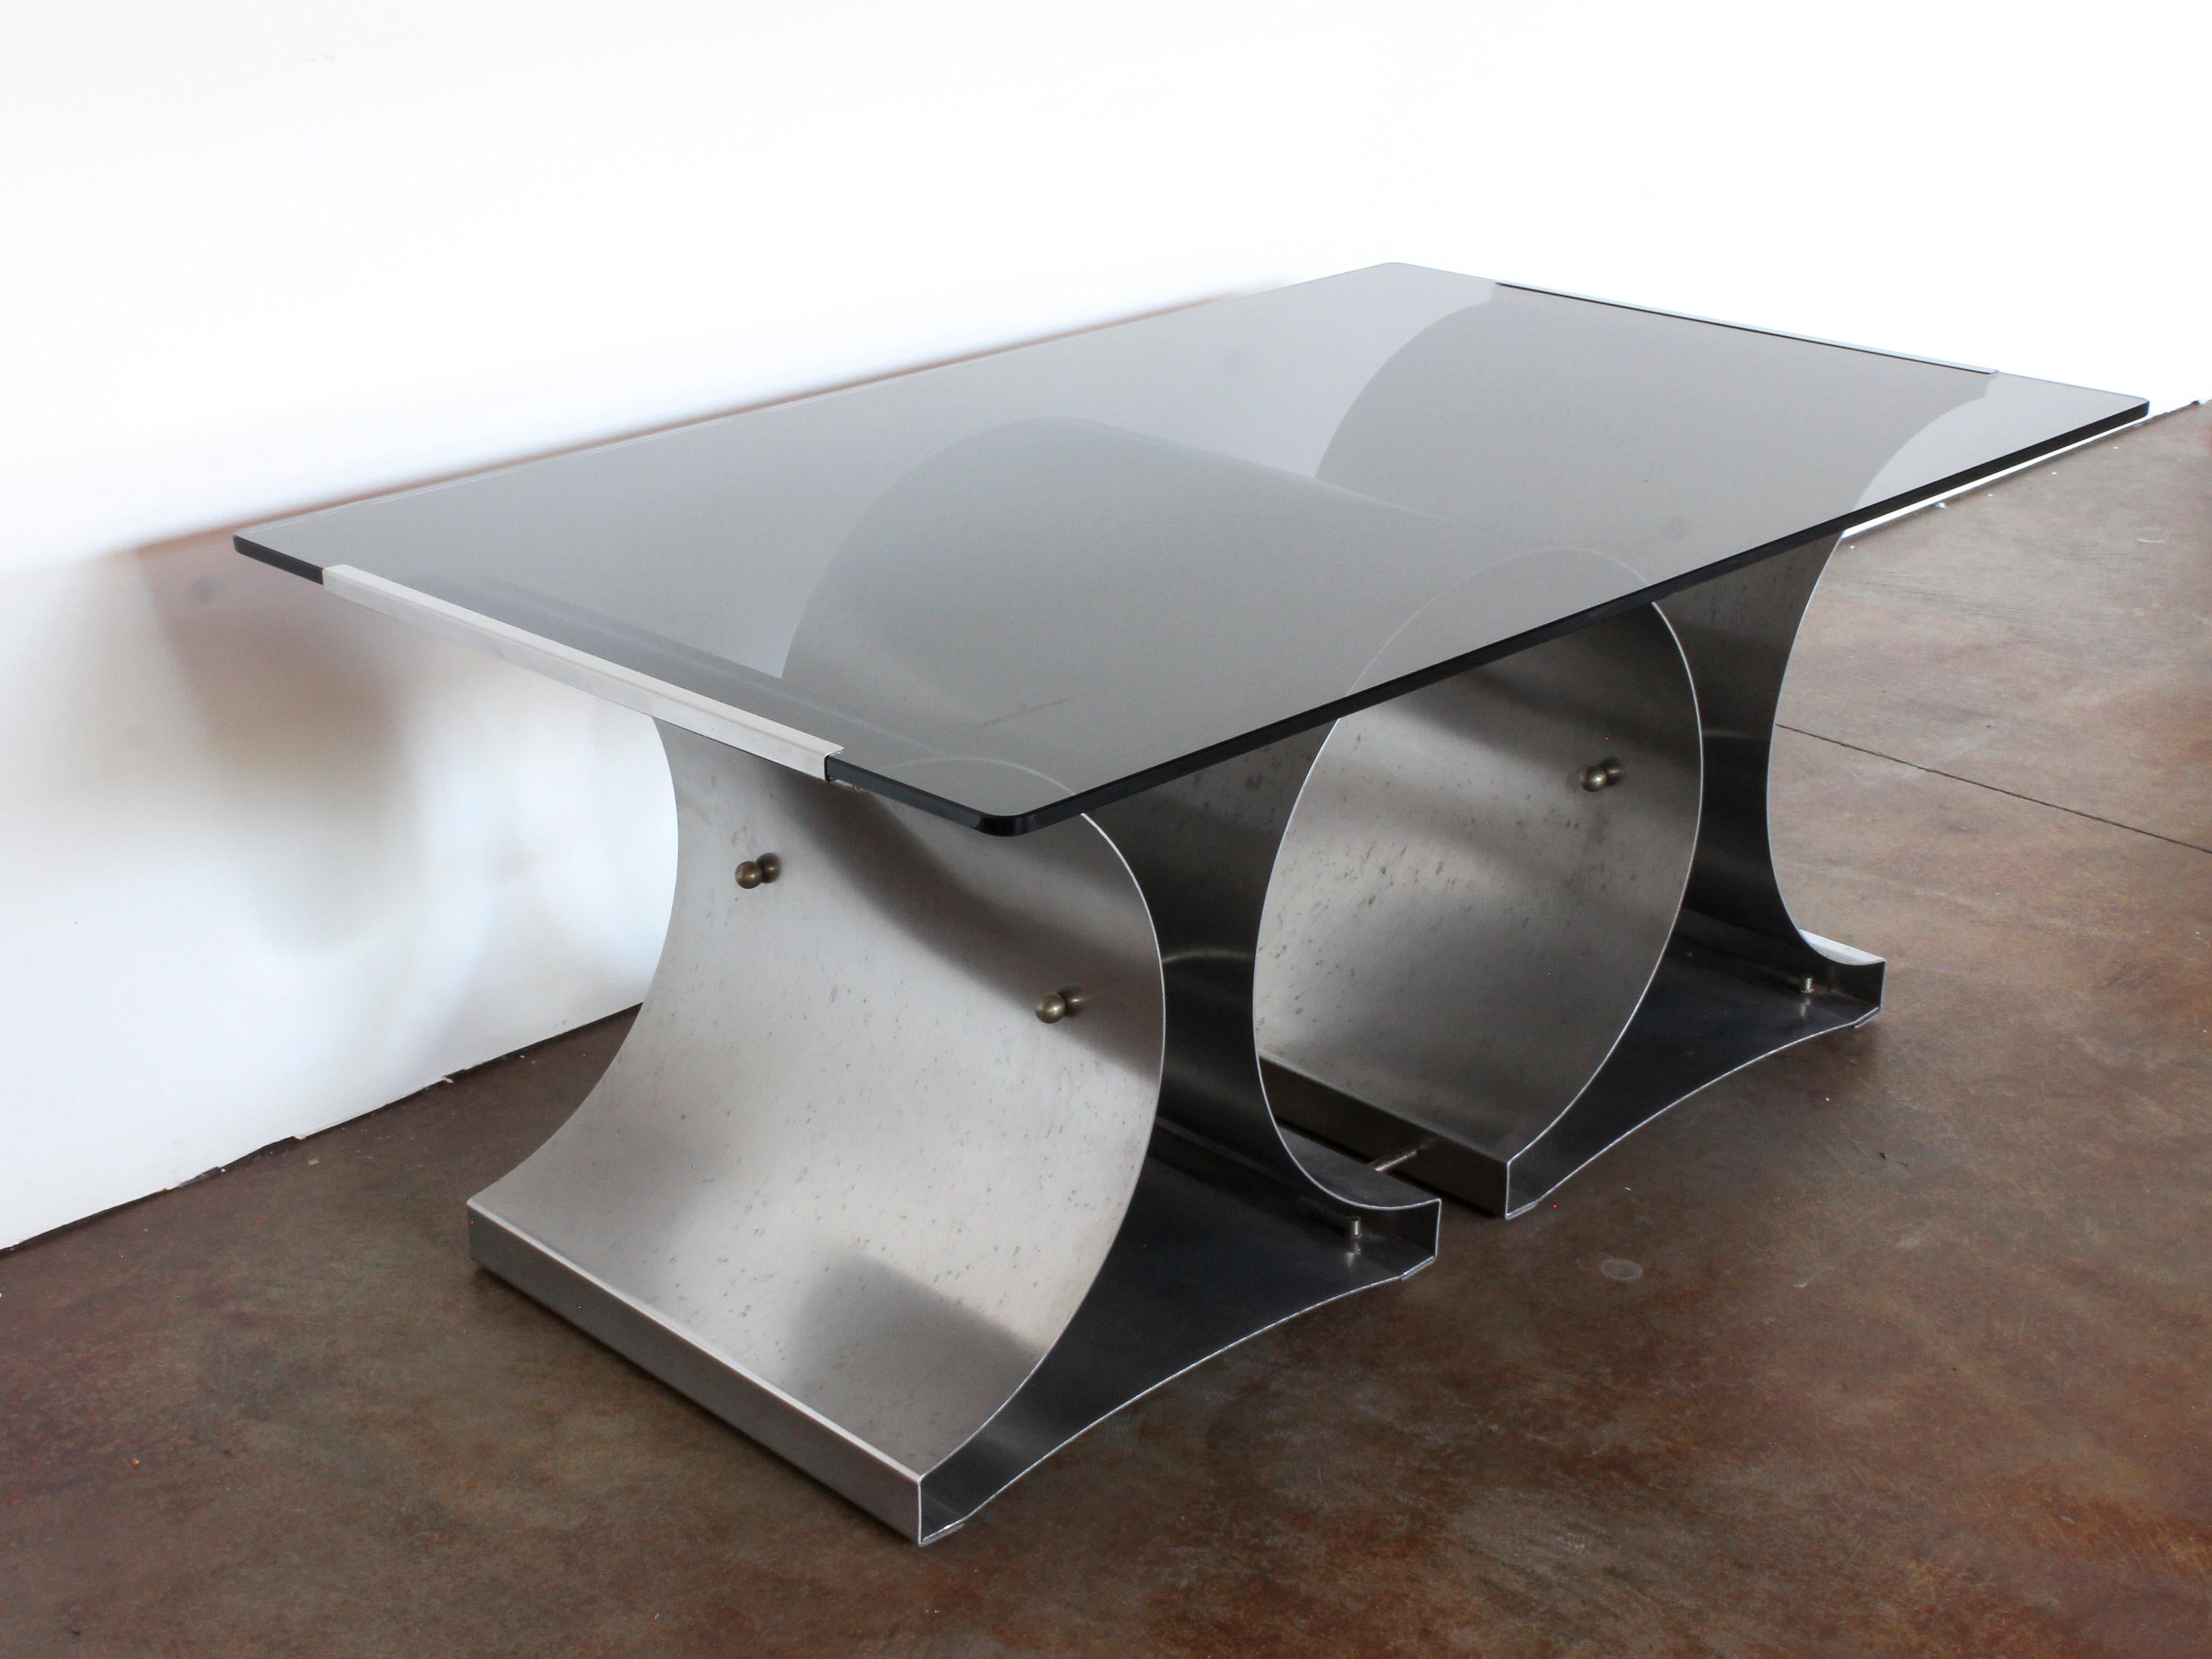 Industrial Steel and Glass Coffee Table by Francois Monnet for Kappa, French, c. 1970 For Sale